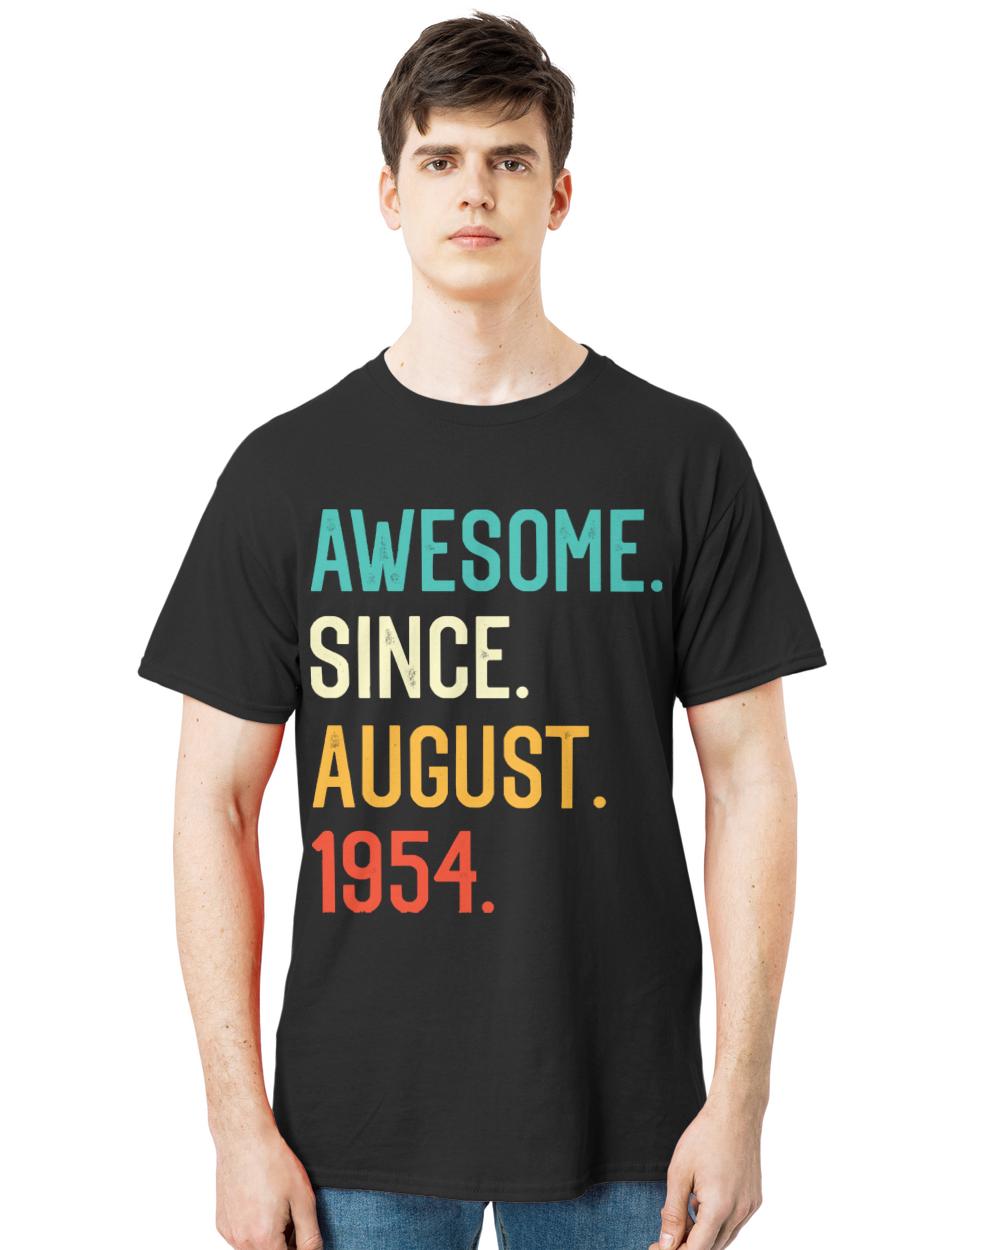 Awesome Since 1954 T- Shirt Awesome Since August 1954 T- Shirt